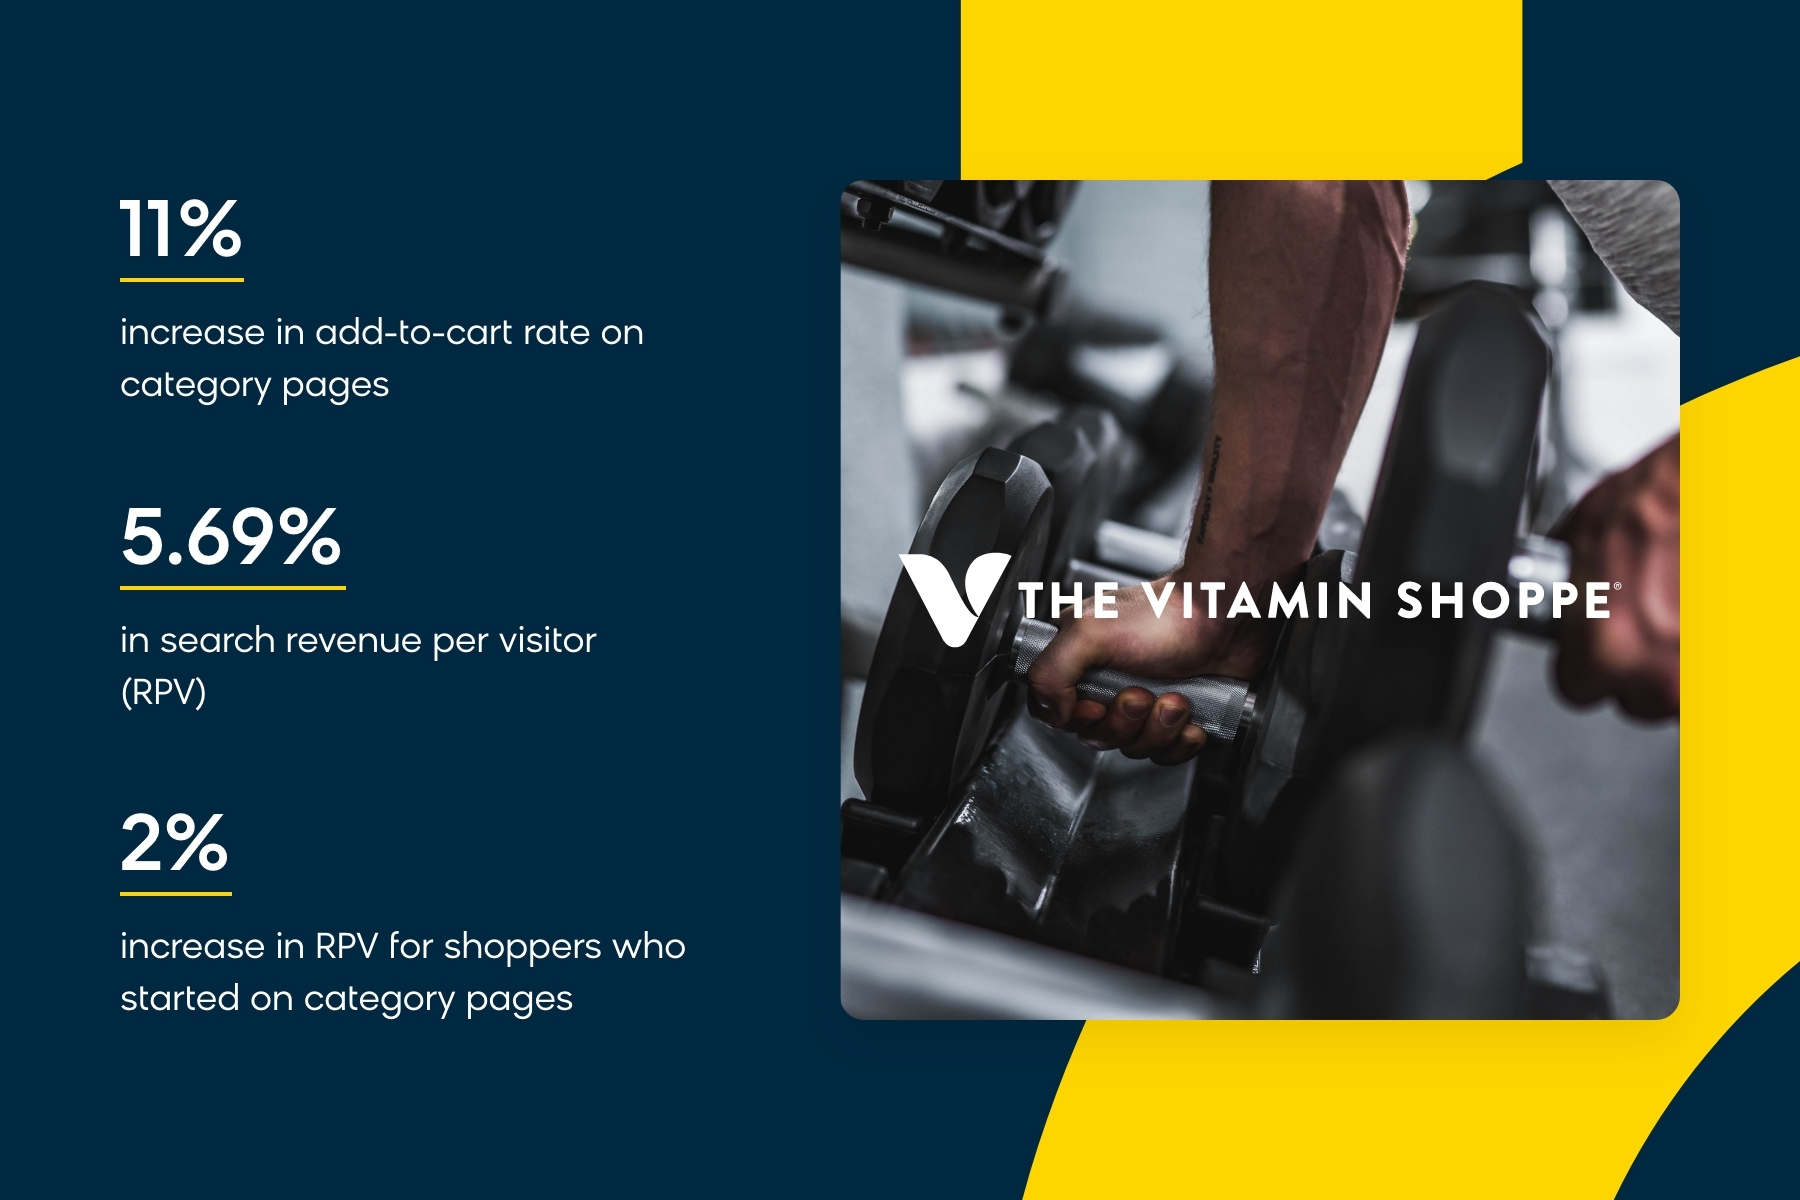 The Vitamin Shoppe results with Bloomreach